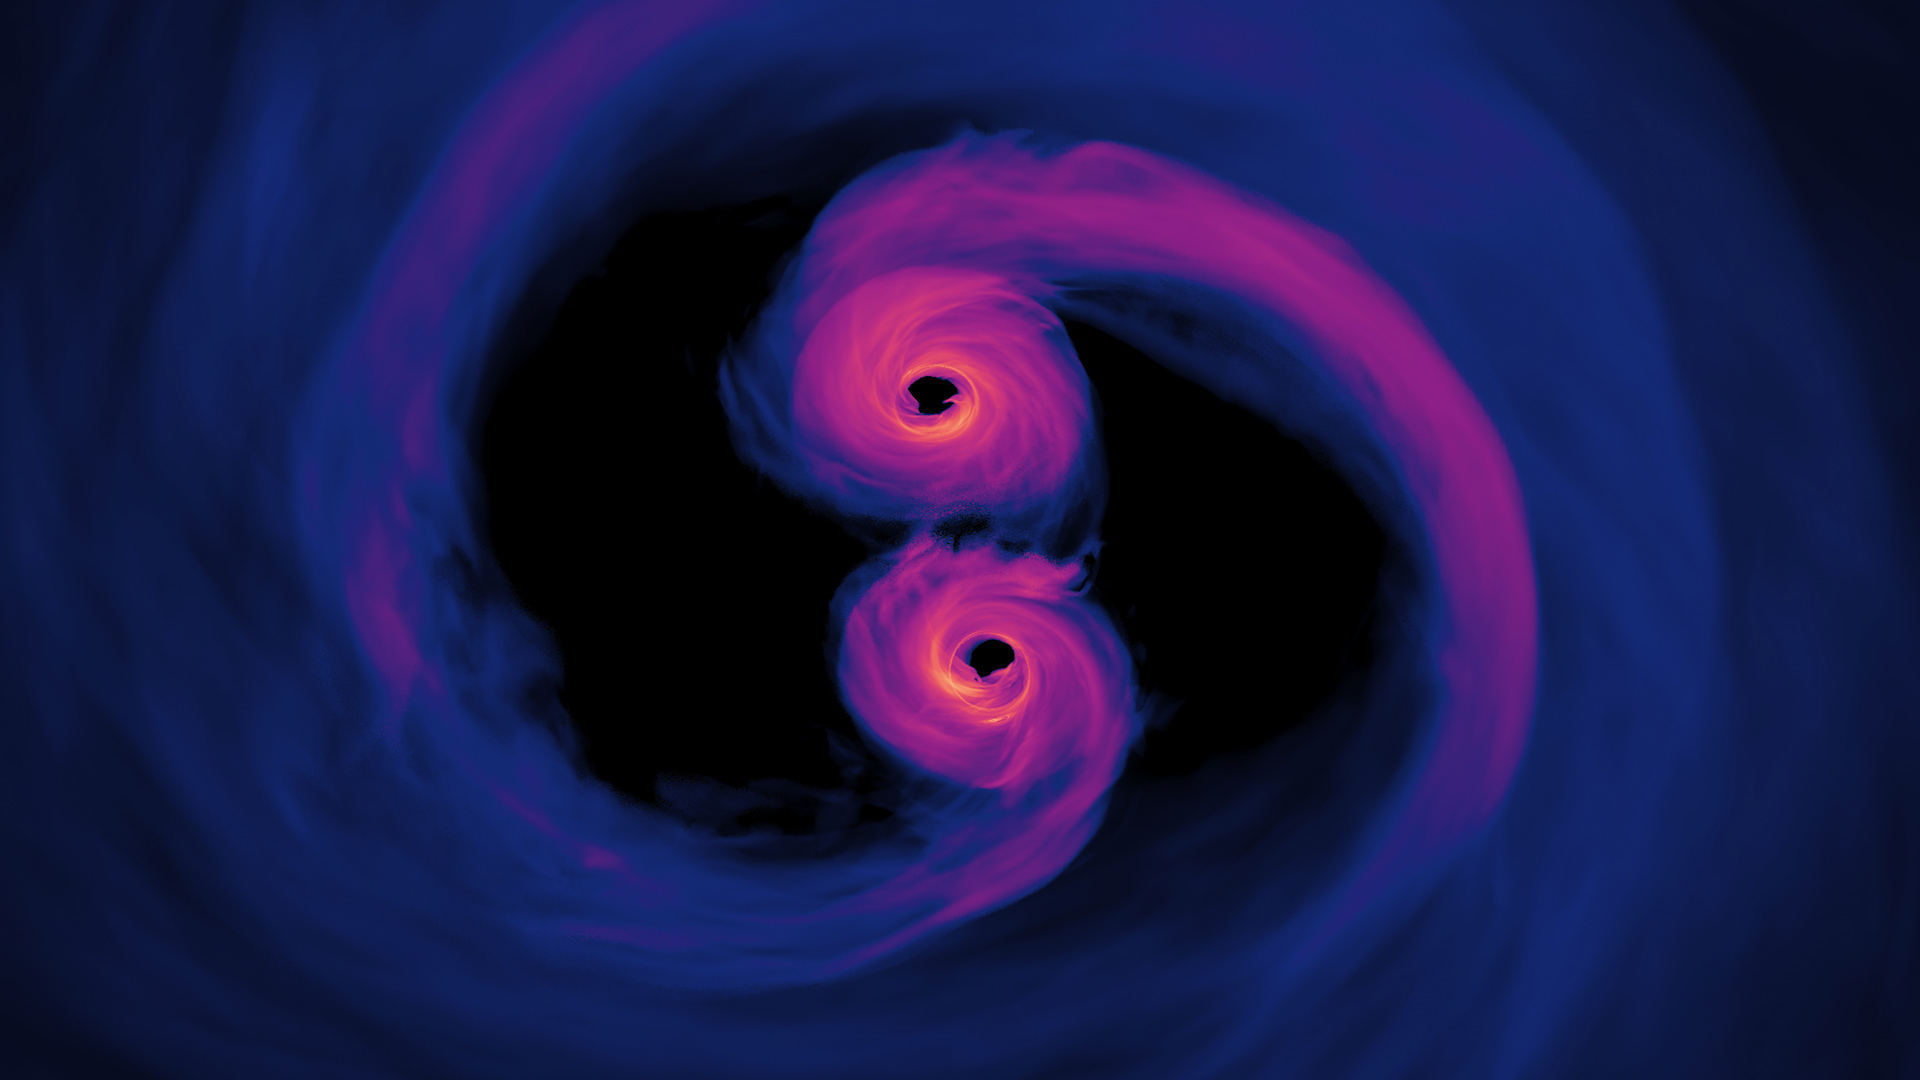 Gas glows brightly in this computer simulation of supermassive black holes only 40 orbits from merging. Models like this may eventually help scientists pinpoint real examples of these powerful binary systems. Credit: NASA's Goddard Space Flight Center/Scott Noble; simulation data, d'Ascoli et al. 2018Music: "Games Show Sphere 01" from Killer TracksWatch this video on the NASA Goddard YouTube channel.Complete transcript available.